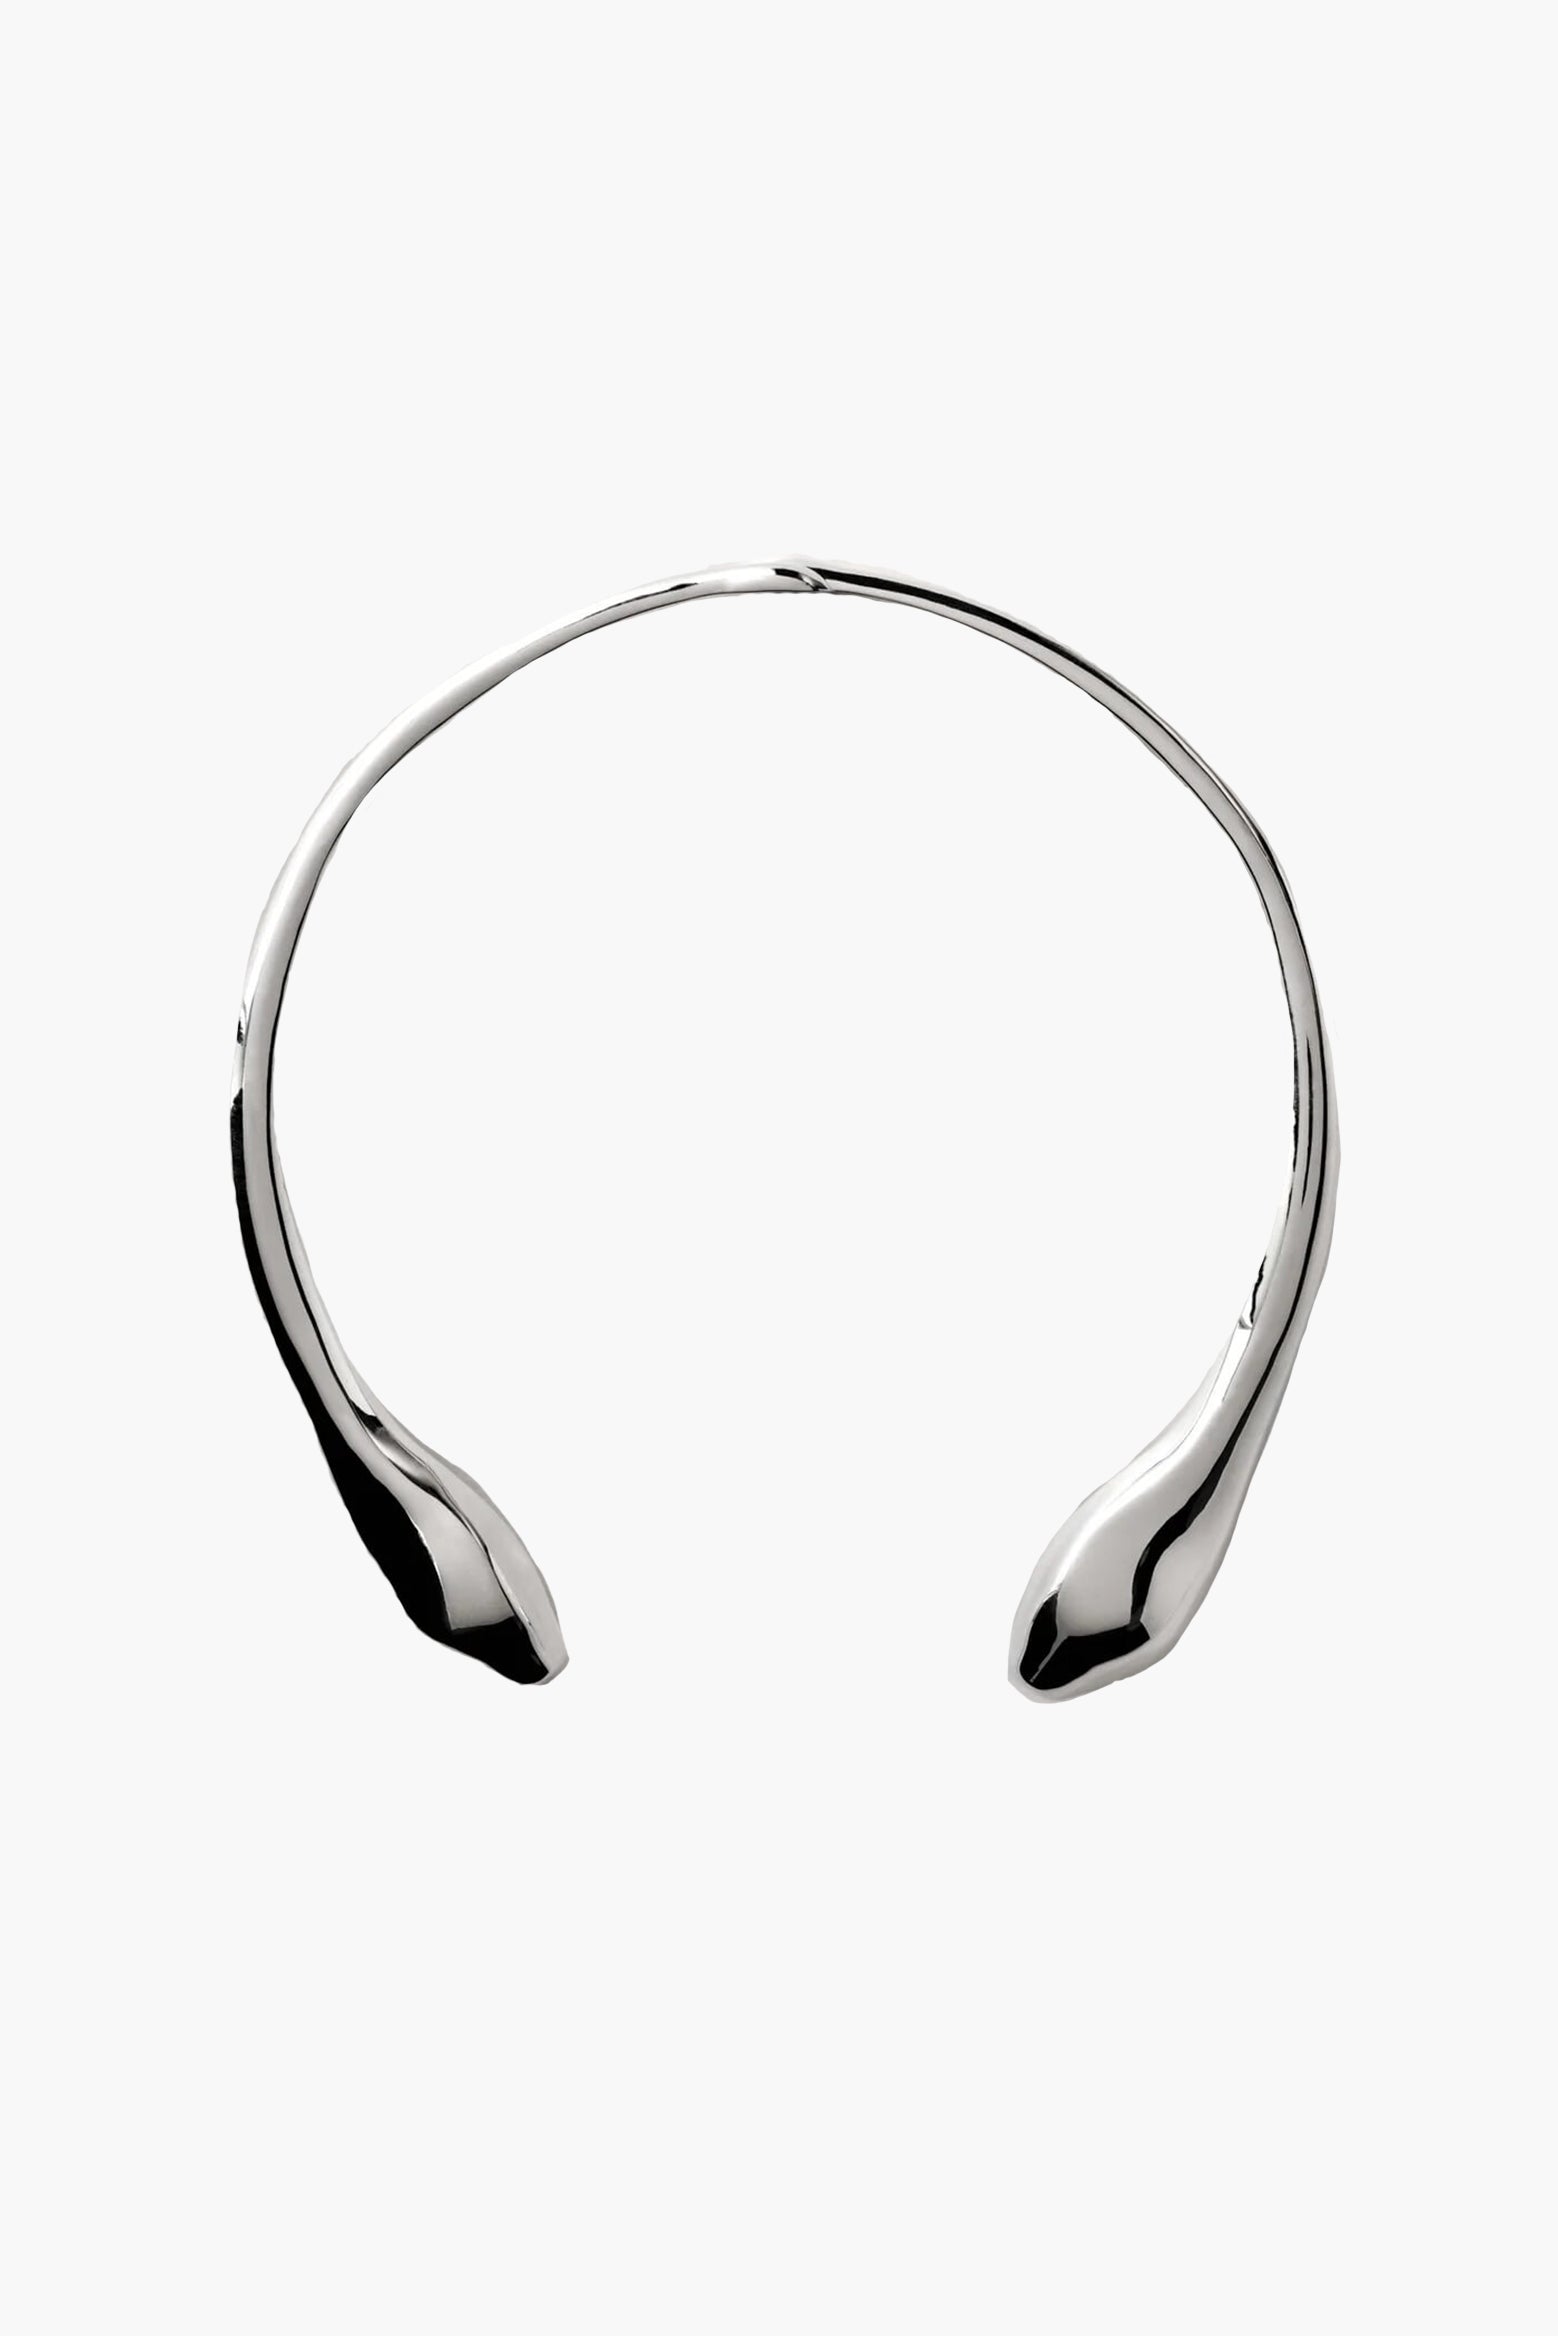 Annika Inez Serpent Collar Necklace in Silver available at The New Trend Australia.